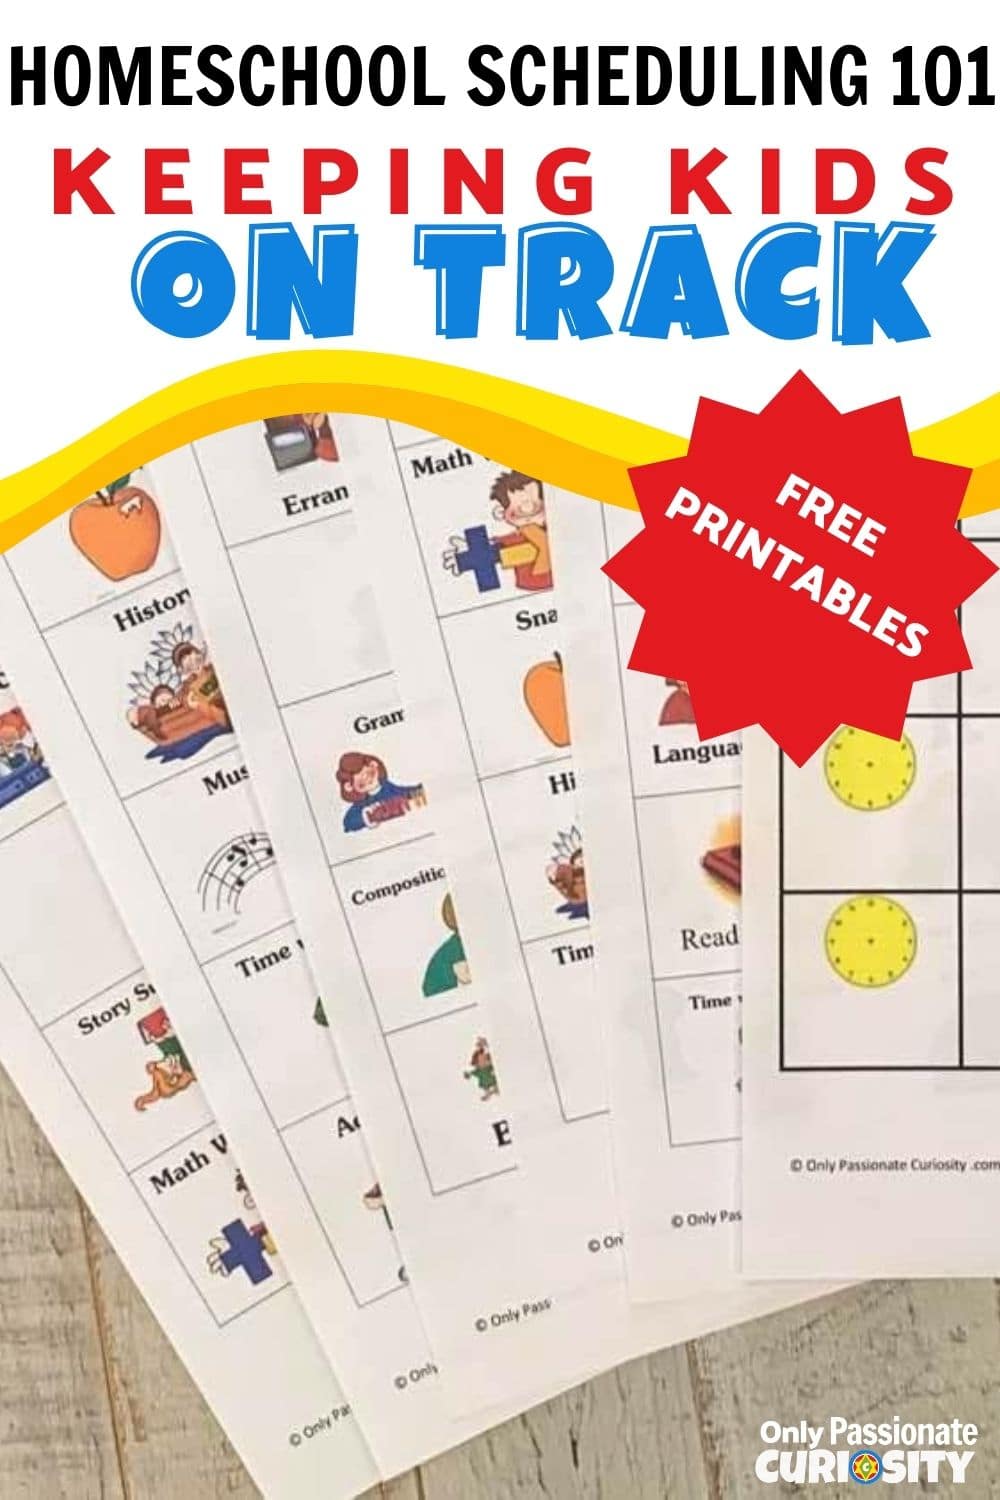 This printable schedule system will help your children learn time management skills and help ensure more productive school days! And it's fun to use!